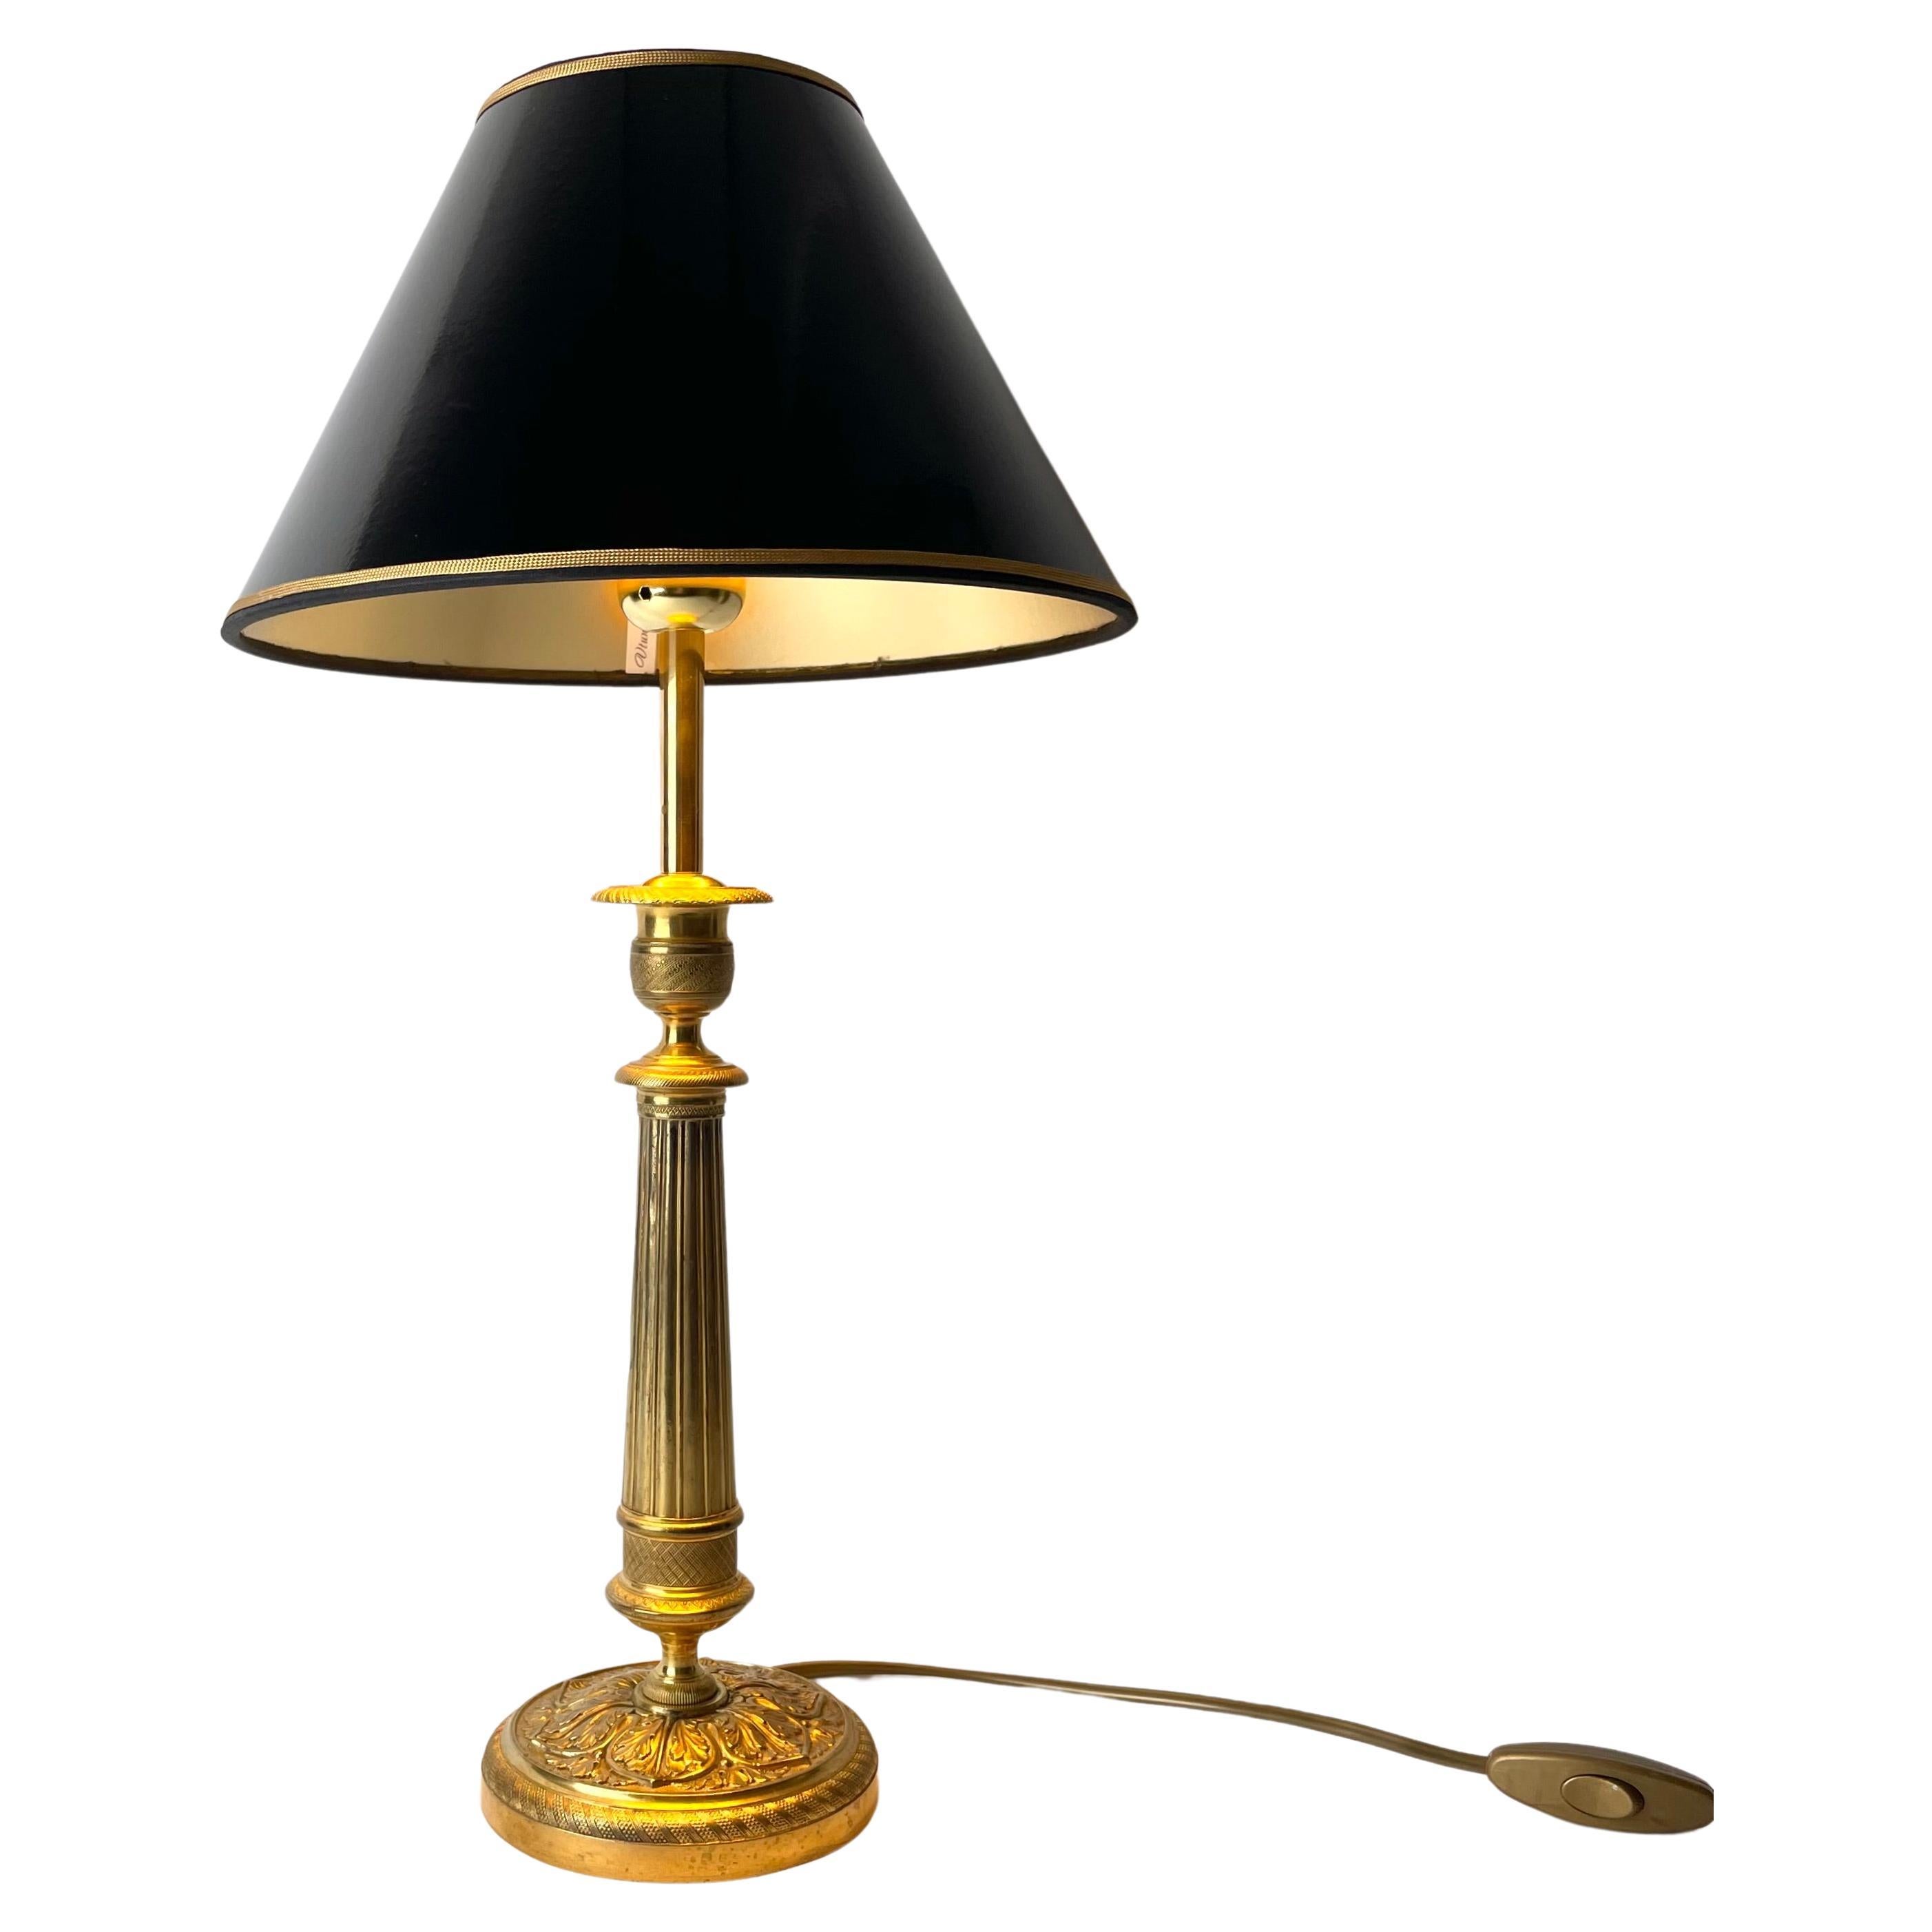 Elegant Table Lamp in bronze. Originally an Empire candlestick from the 1820s